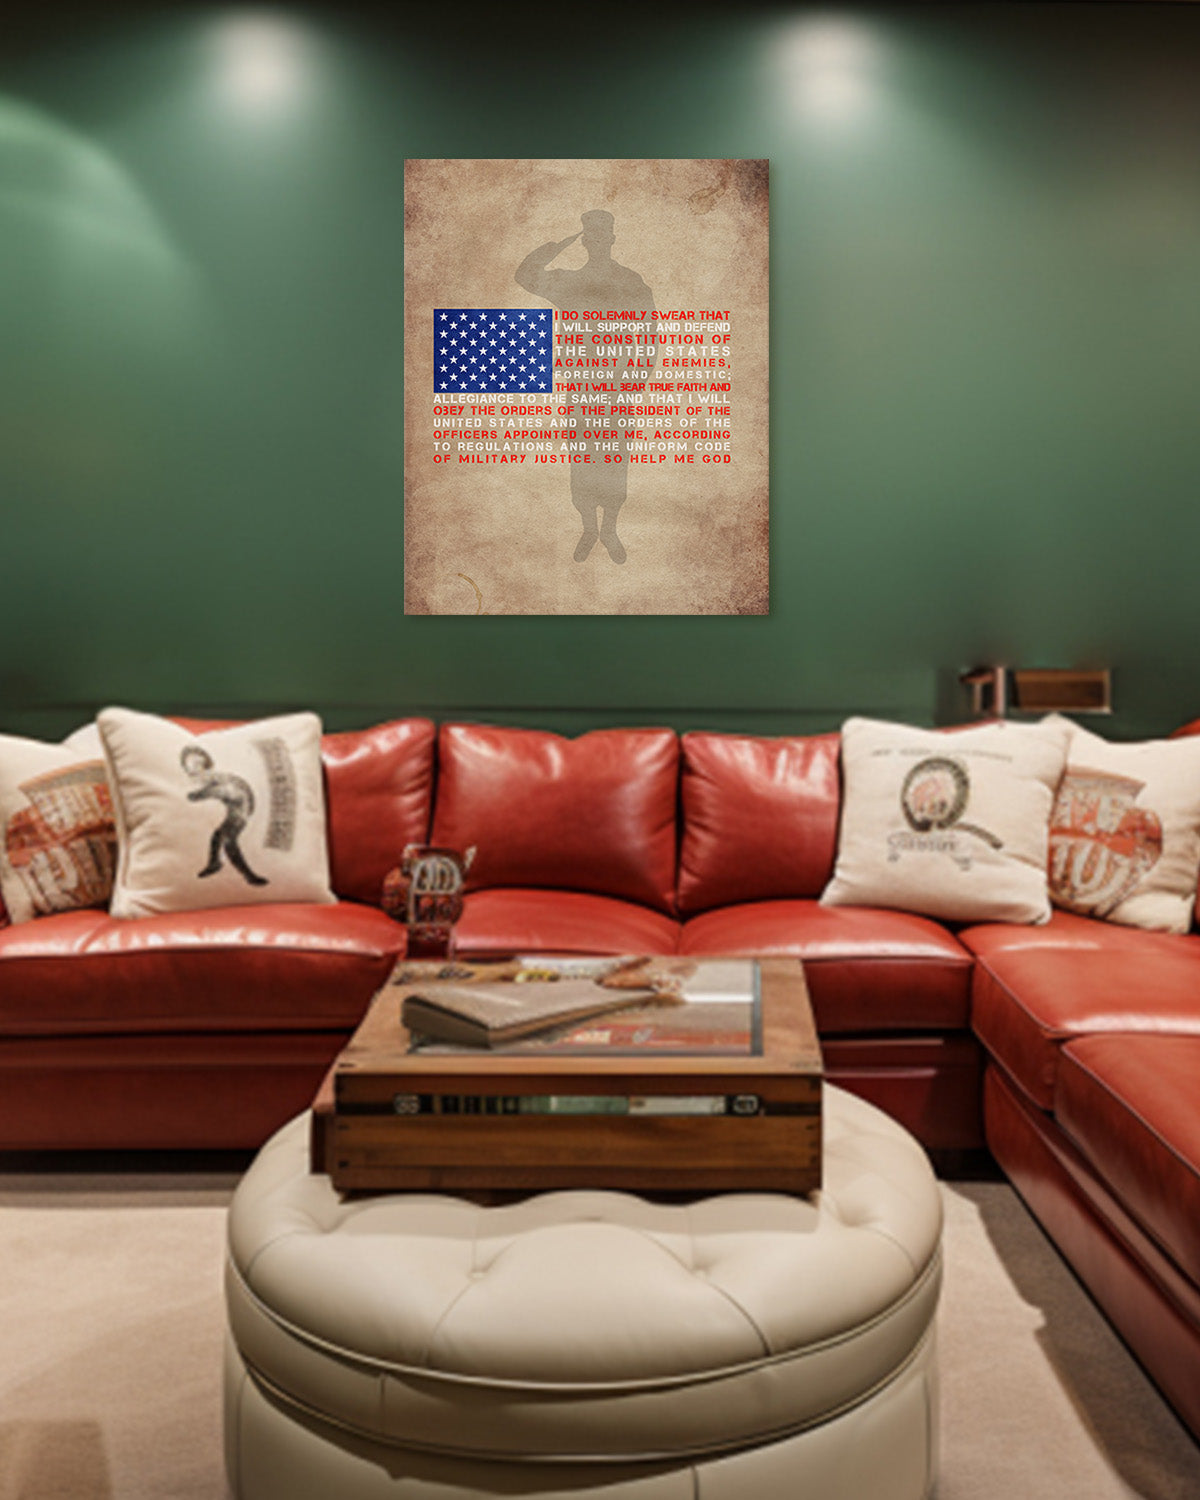 I Do Solemnly Swear - Honoring Our Veterans Wall Decor Art